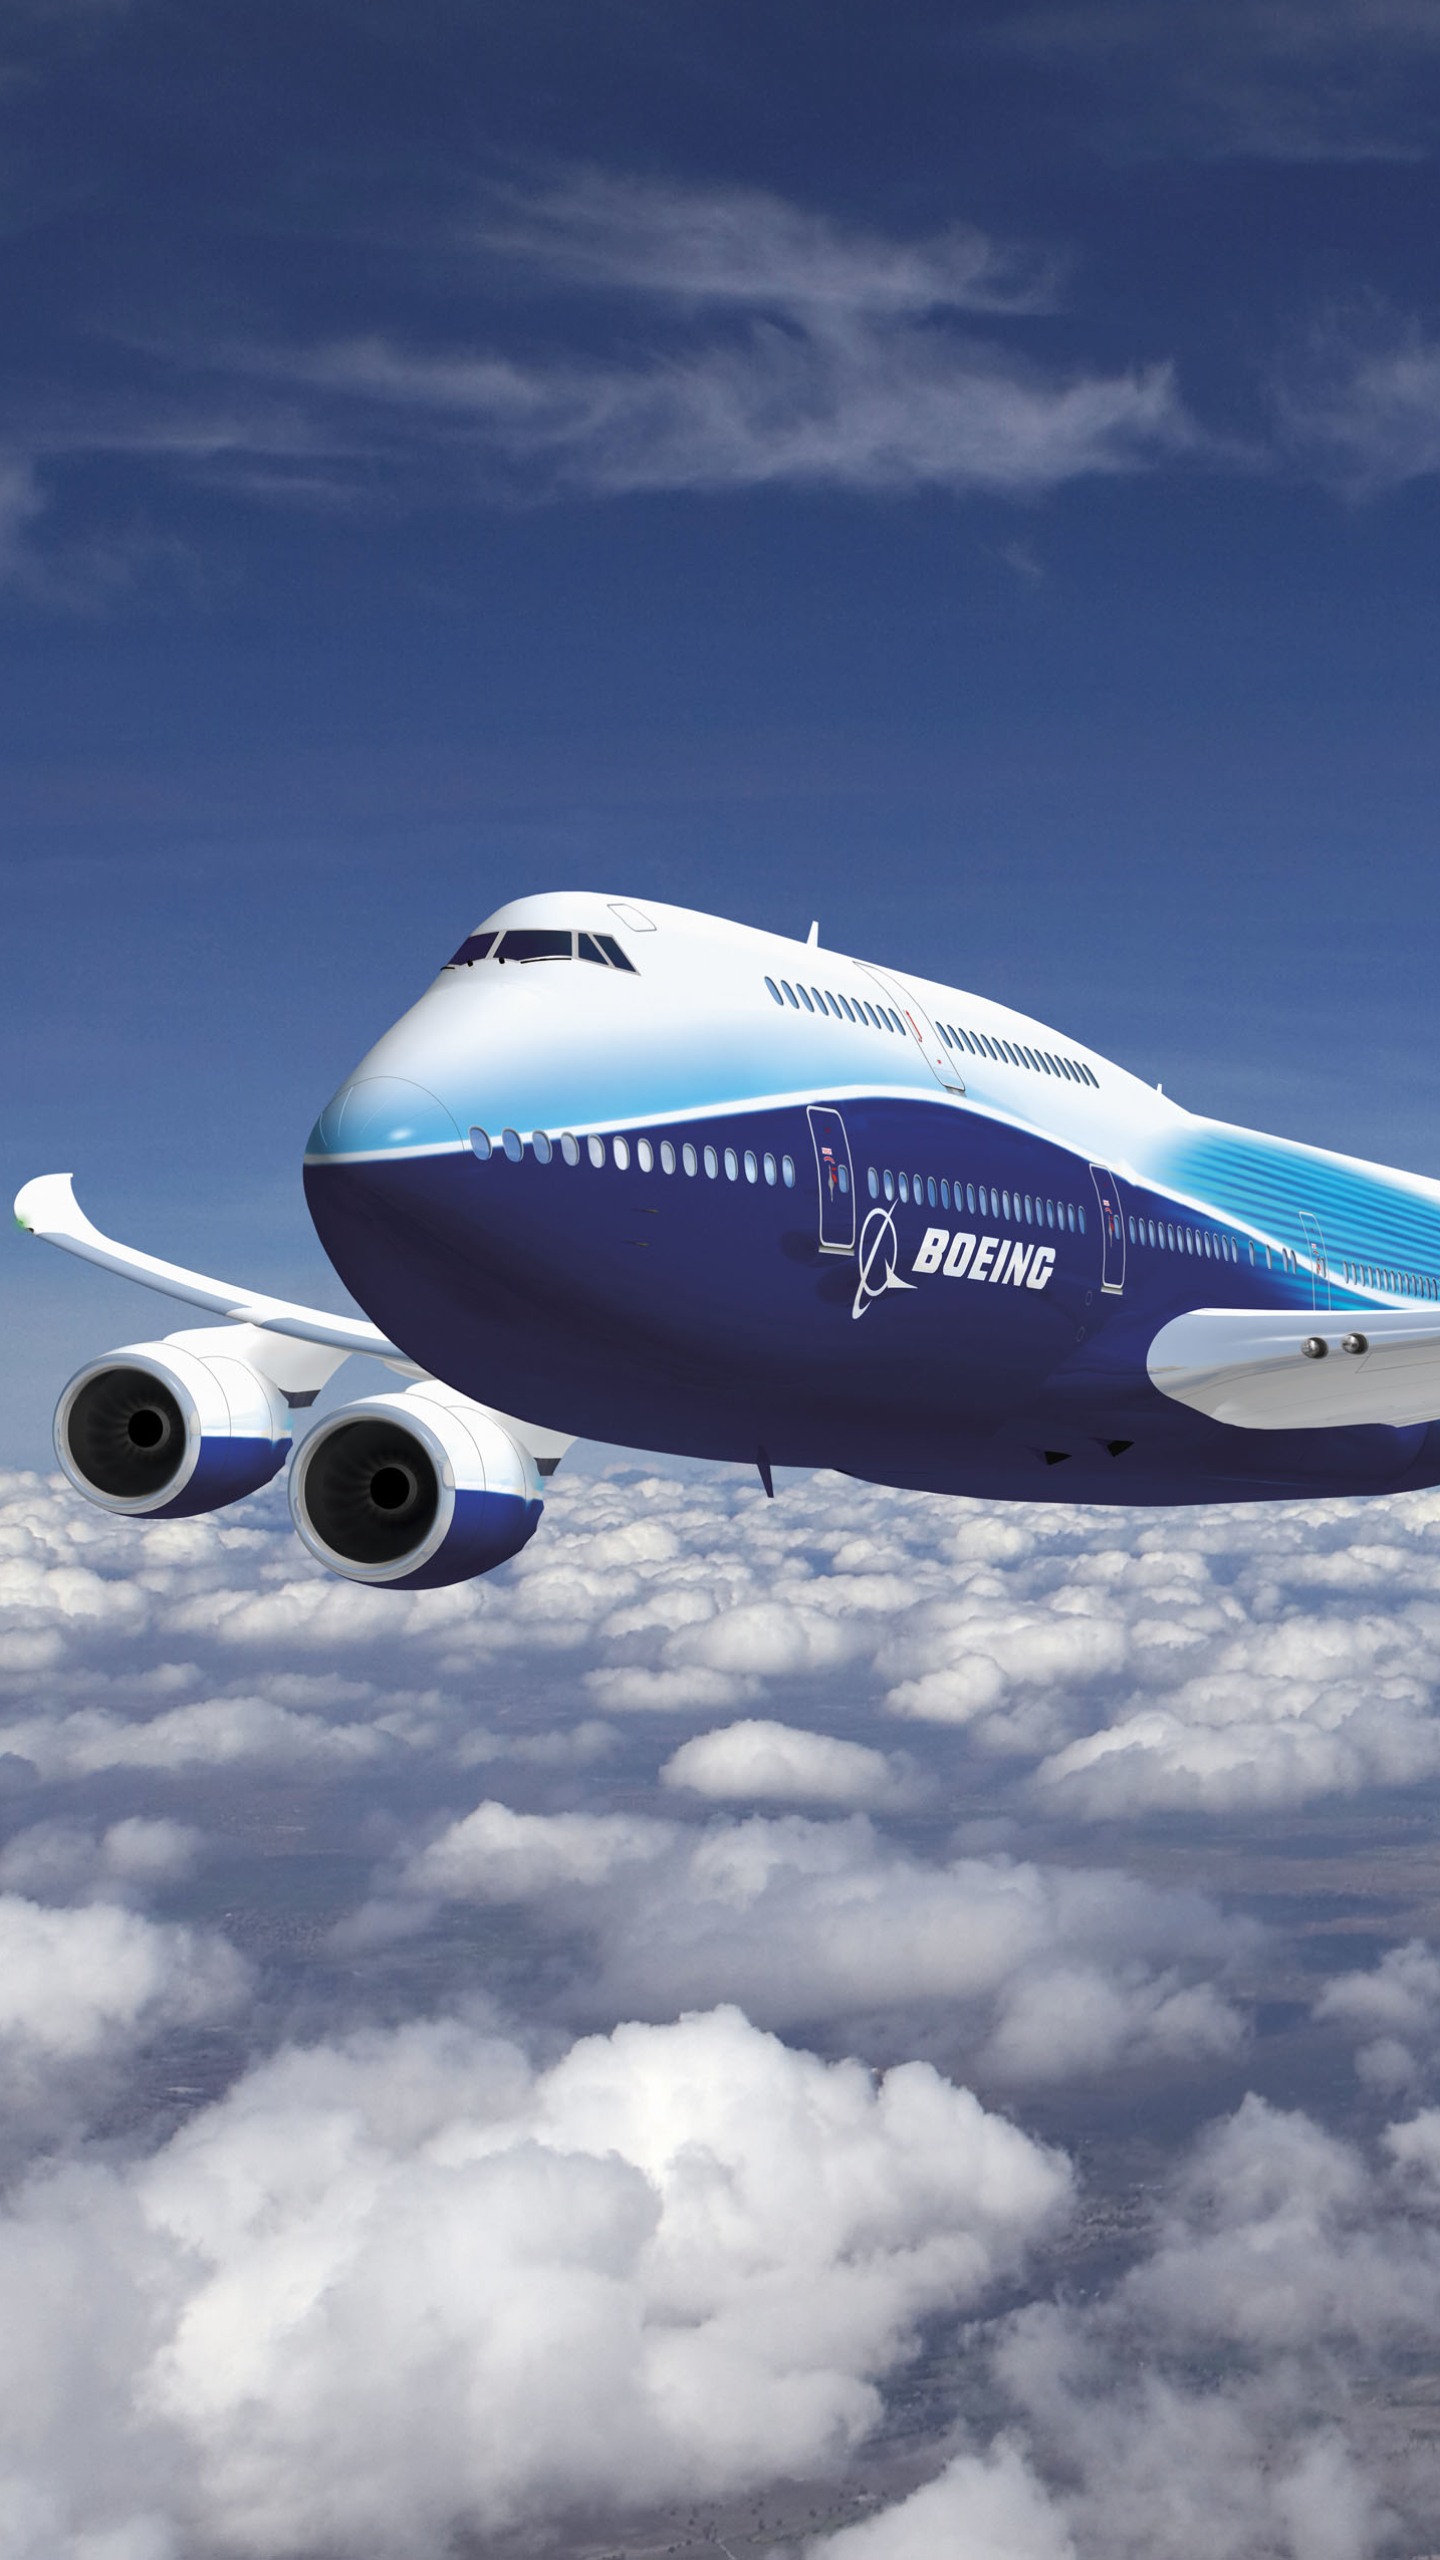 vehicles, boeing 747, aircraft, cloud